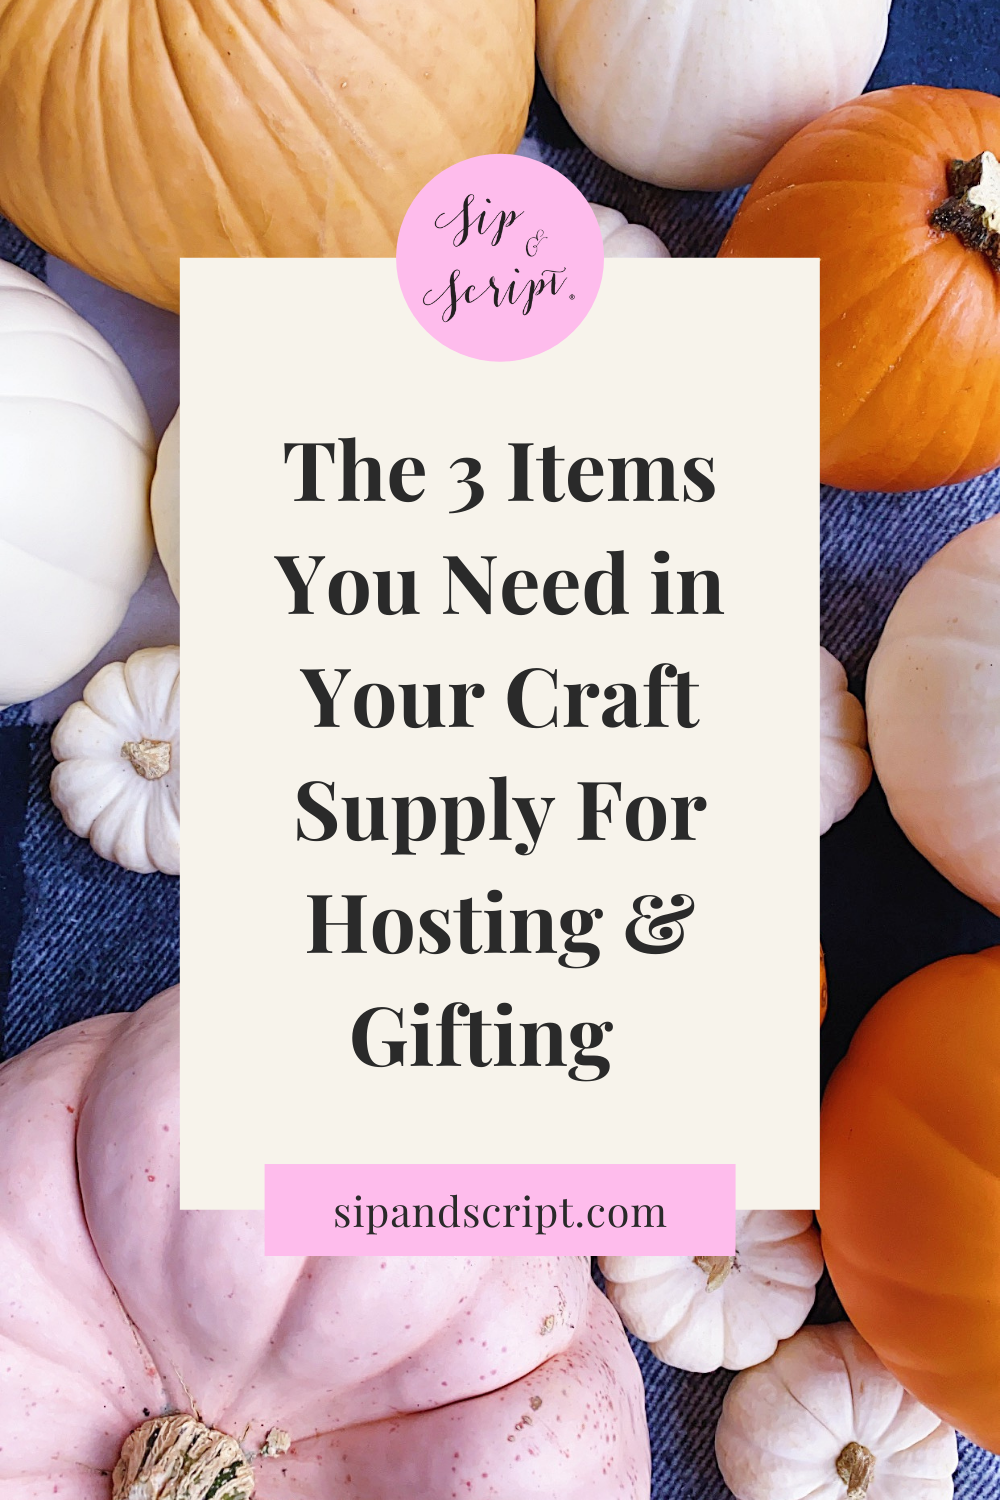 graphic on pumpkins The 3 Items You Need In Your Craft Supply For Hosting & Gifting"